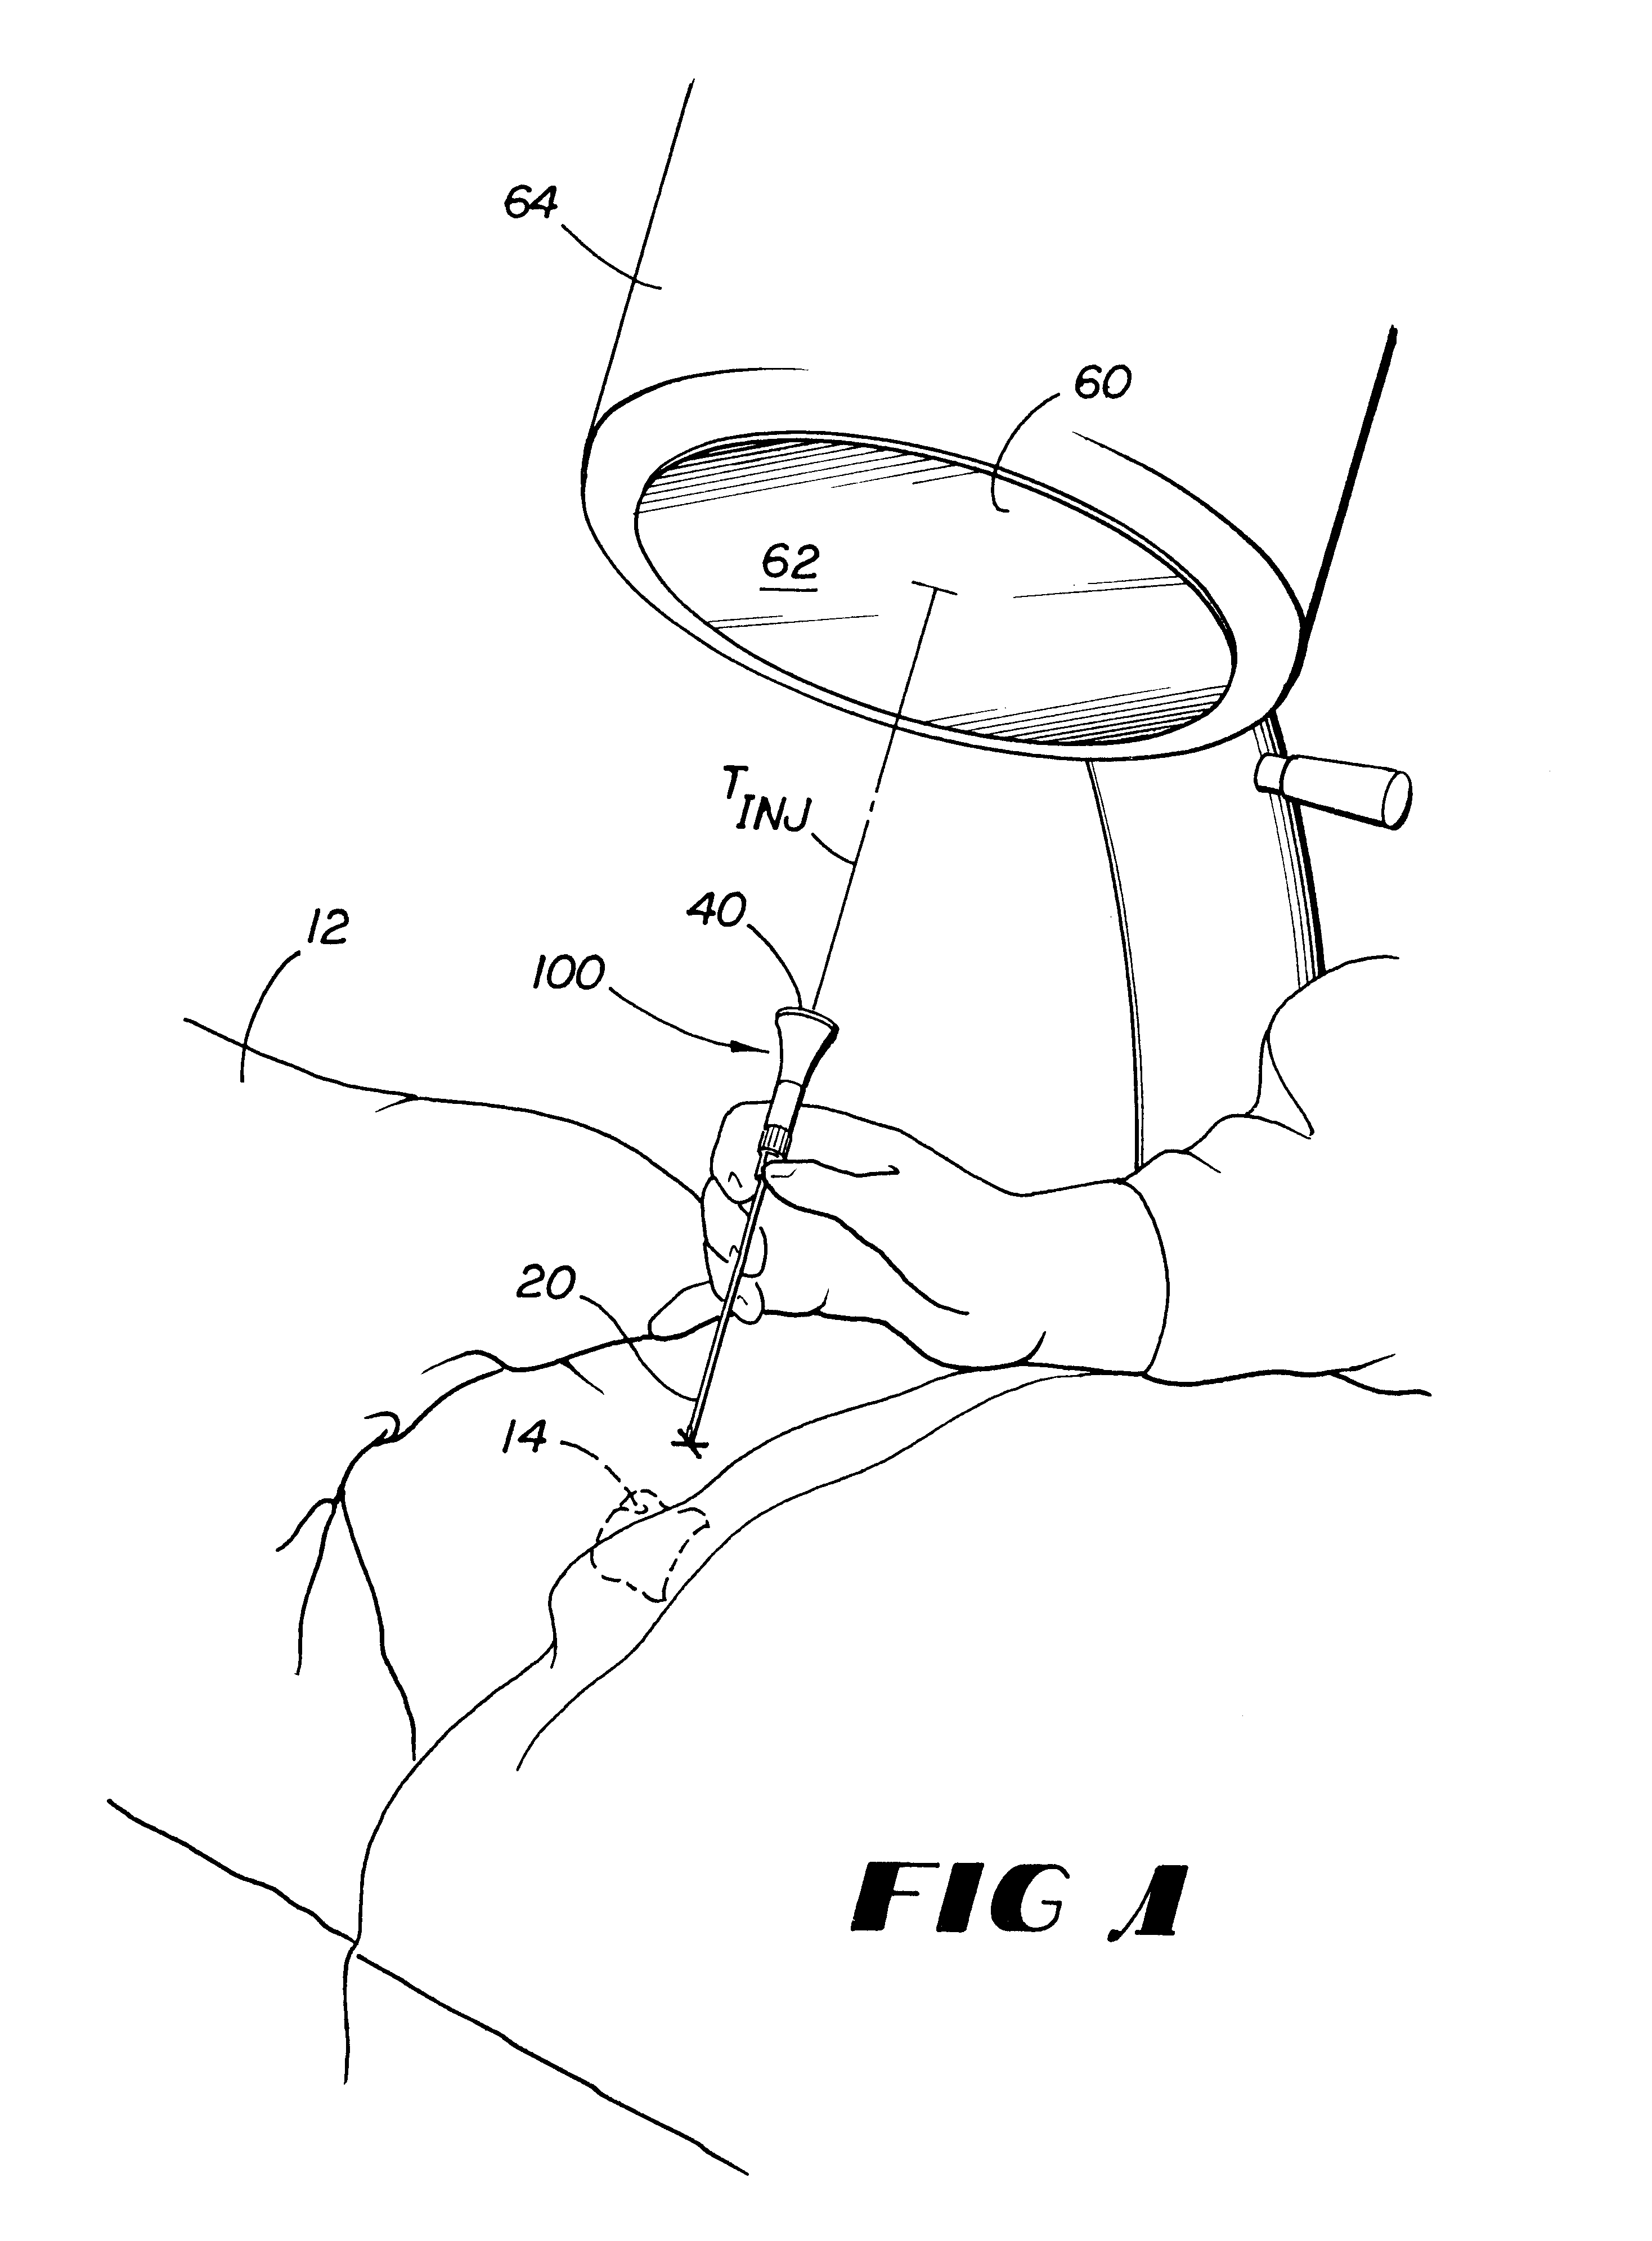 Percutaneous needle alignment system and associated method